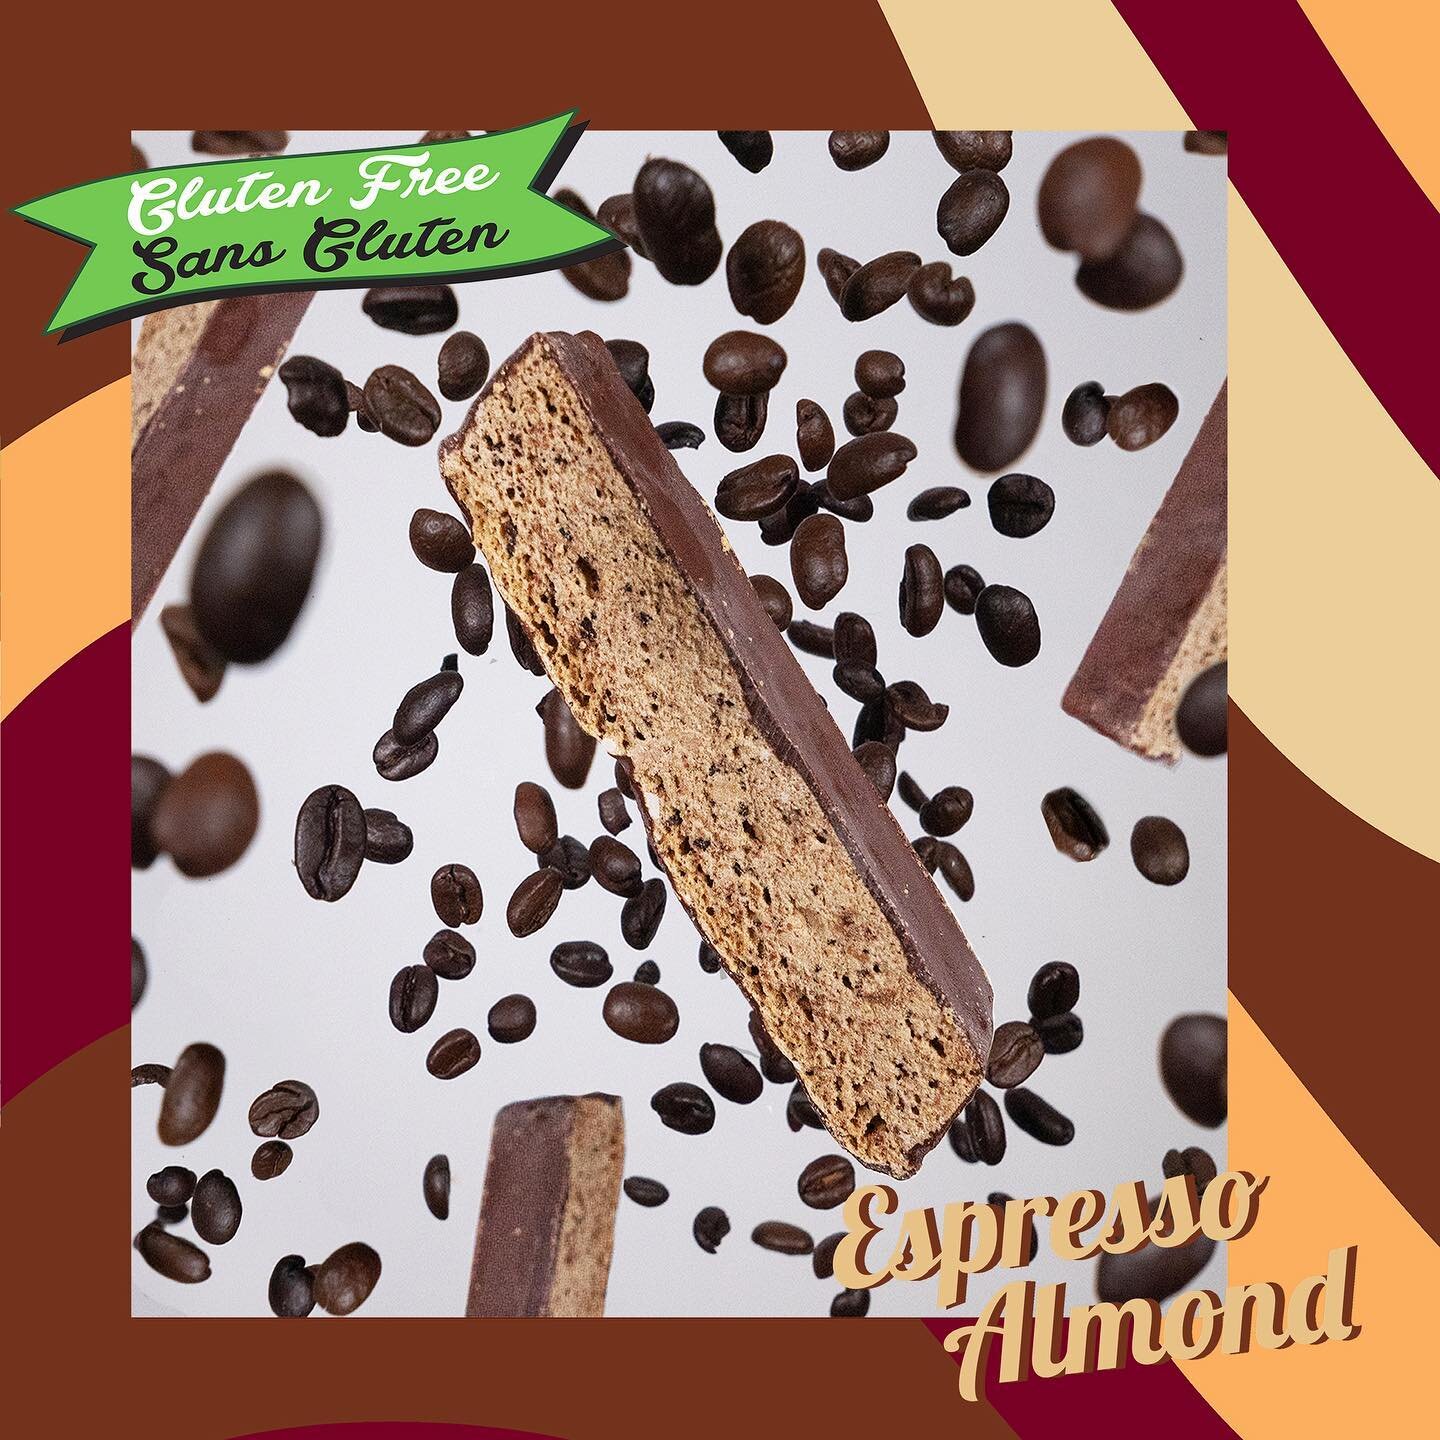 For a perfect companion to your morning coffee try our Gluten Free Espresso Almond Biscotti, with freshly roasted almonds and beans smothered in dark chocolate!

-
#morning #coffee #treat #cookies #biscotti #delicious #beautiful